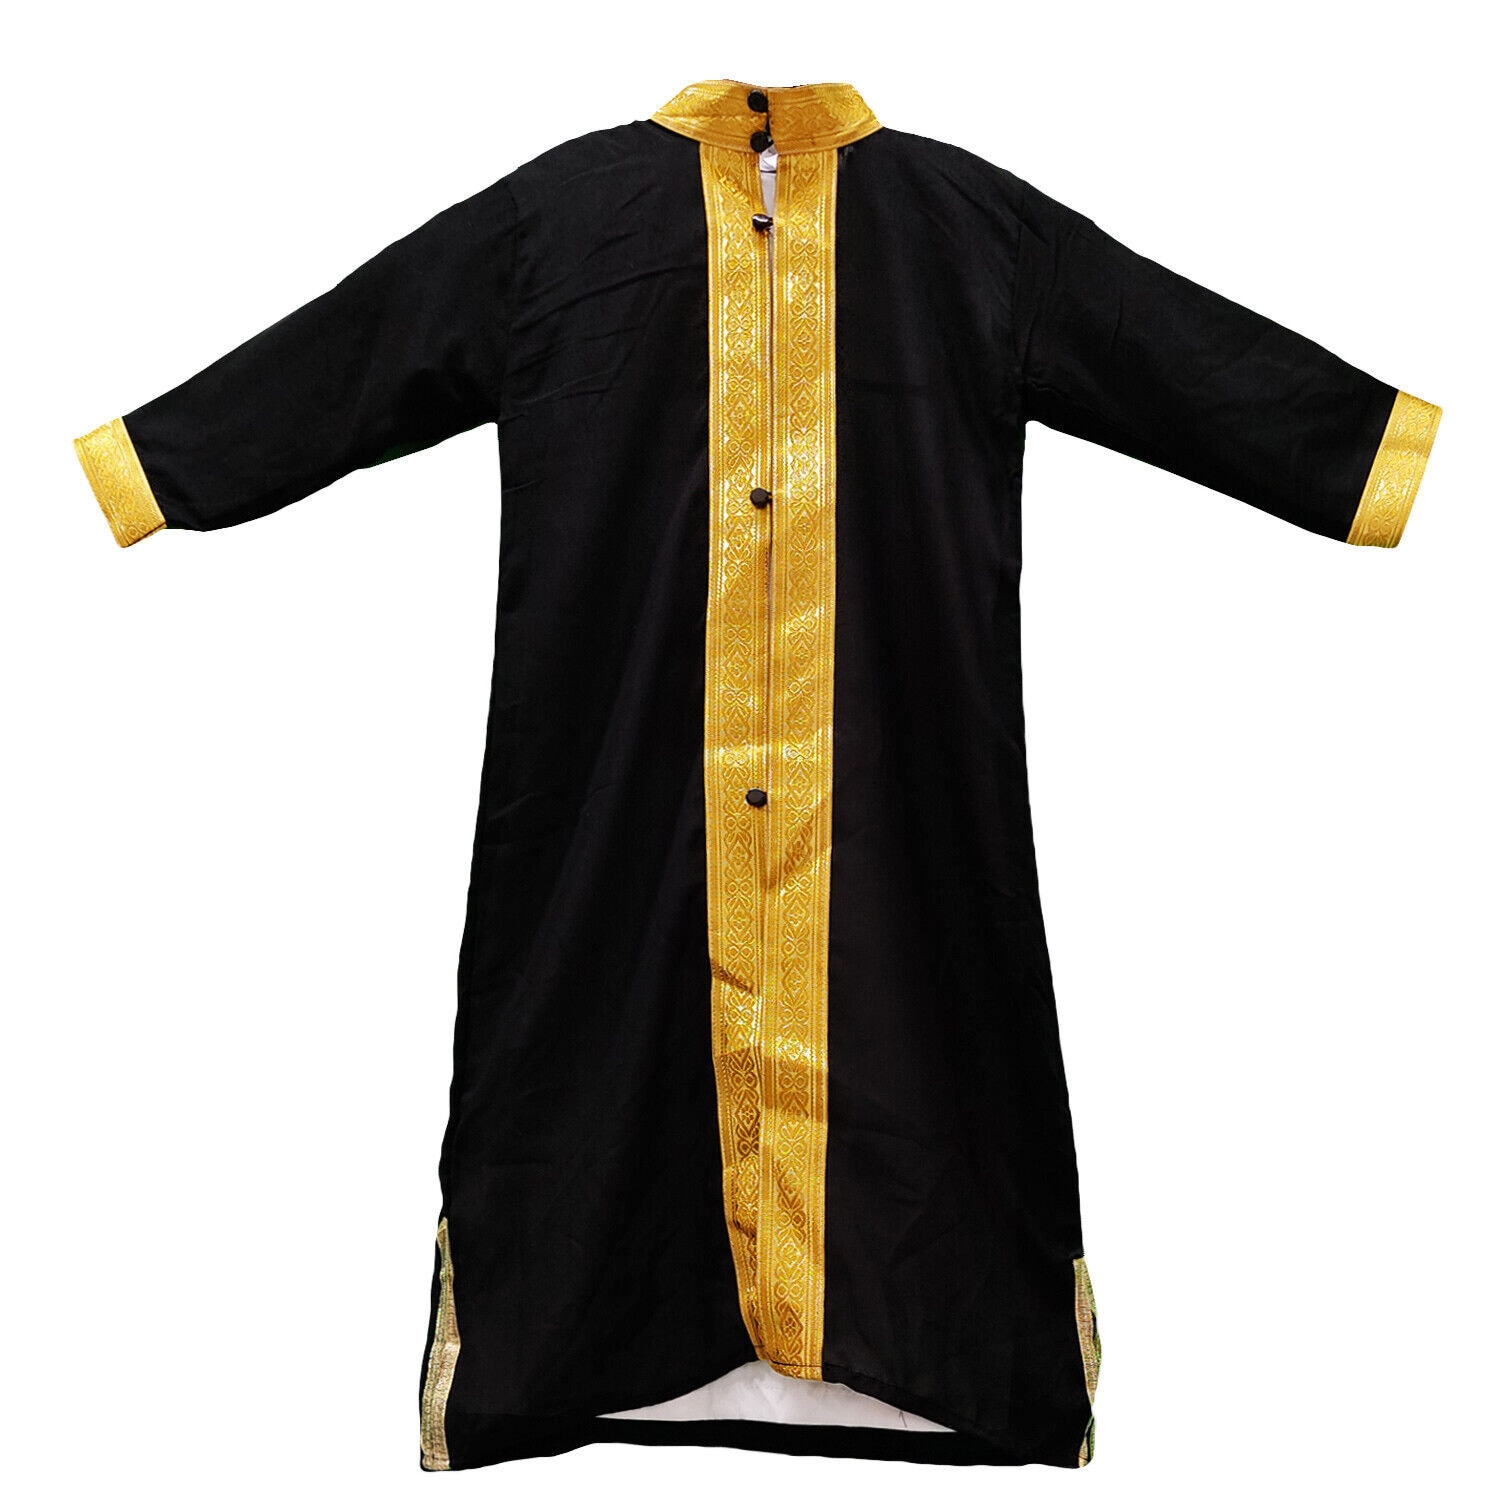 Wedding Islamic Clothing Online Shopping for Women at Low Prices